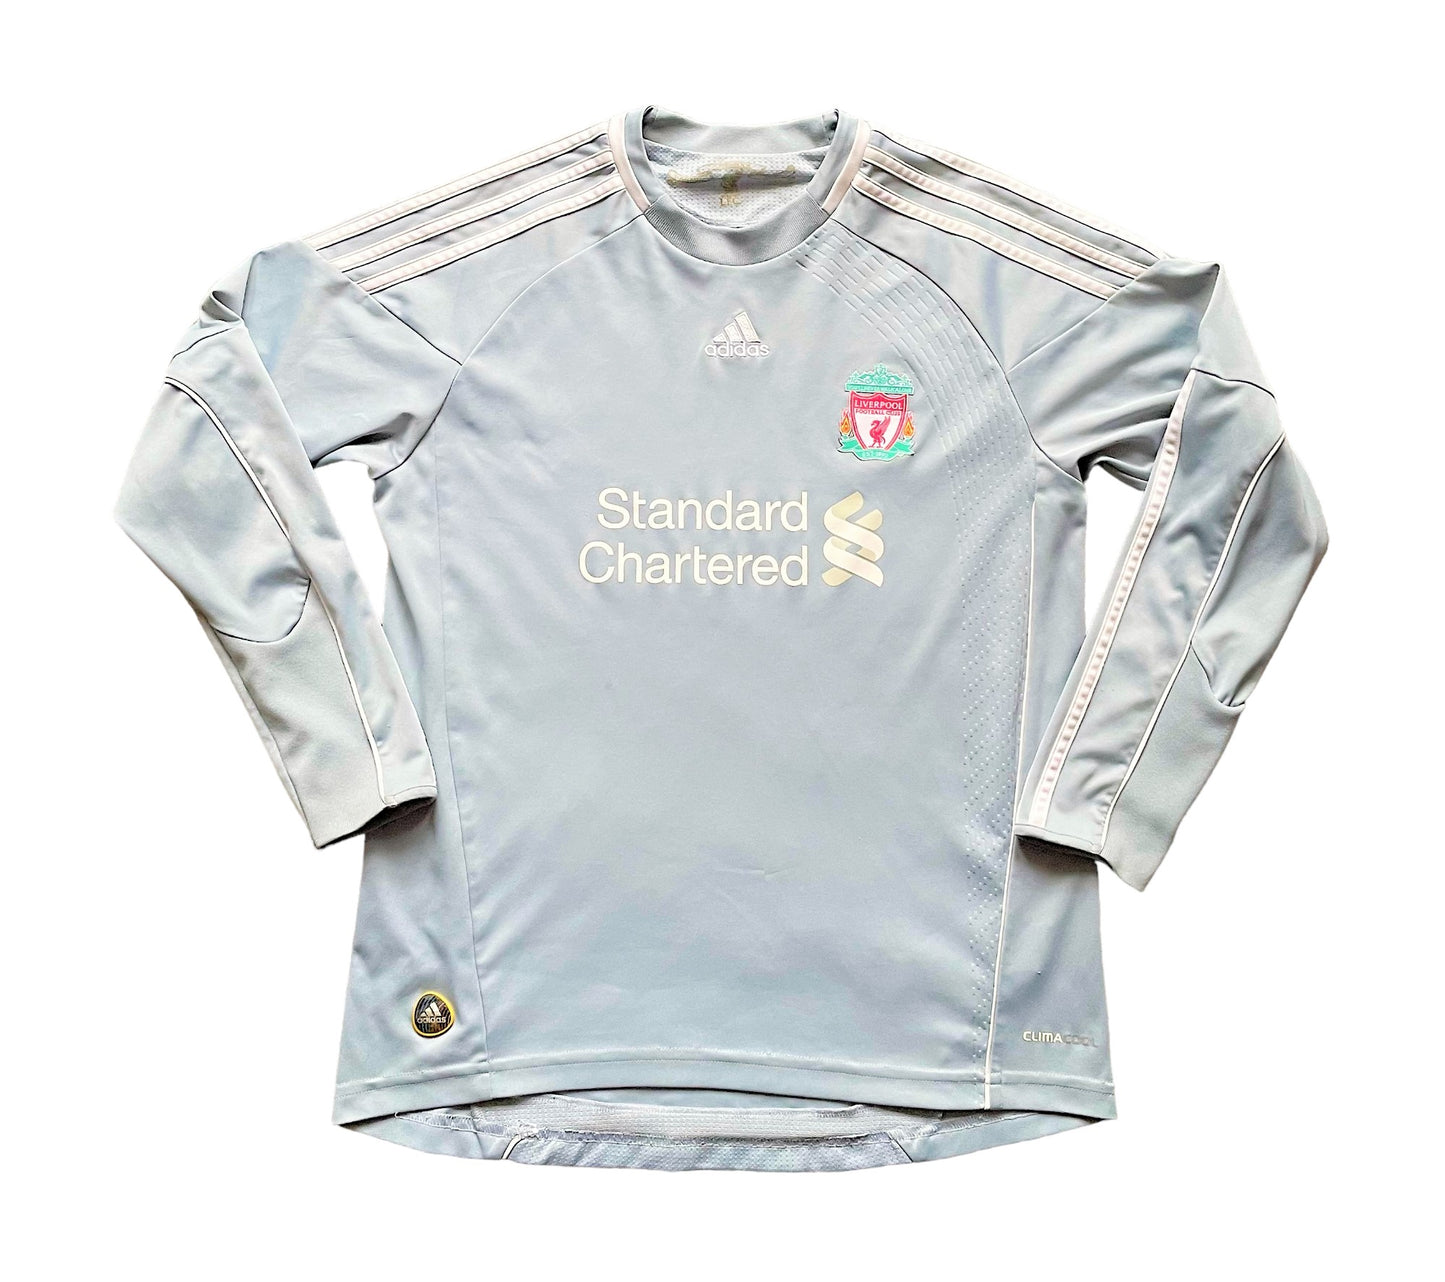 Liverpool Goalkeeper Shirt 2010/11 (excellent) Adults XXS/Youths 11 to 12 years. Height 20.5 inches